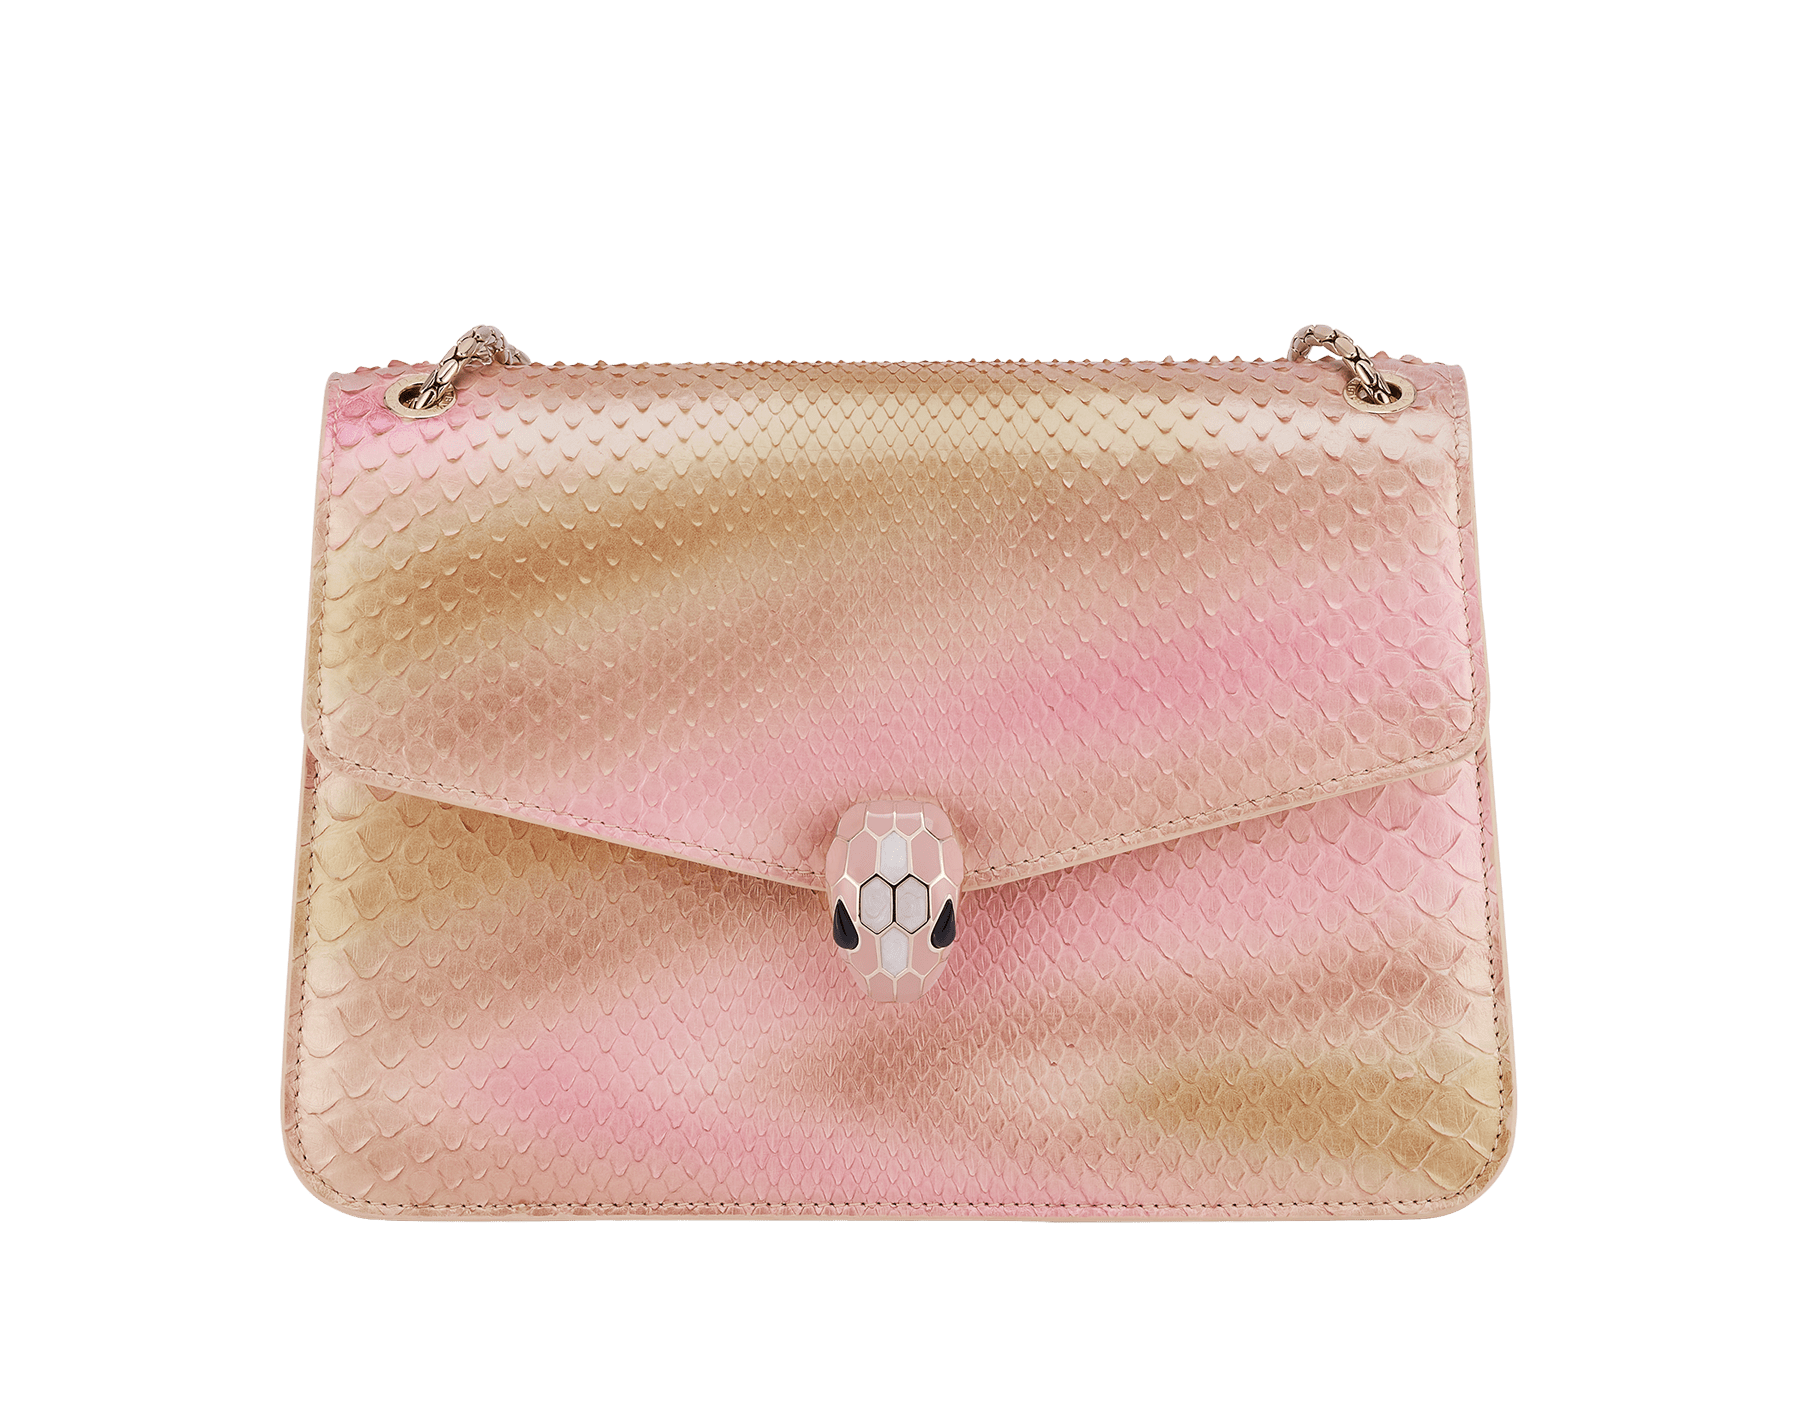 Serpenti Forever medium shoulder bag in pyrite Decò gold python skin with crystal rose nappa leather lining. Captivating snakehead magnetic closure in light gold-plated brass embellished with caramel topaz beige and white mother-of-pearl enamel scales, and black onyx eyes. 292077 image 1